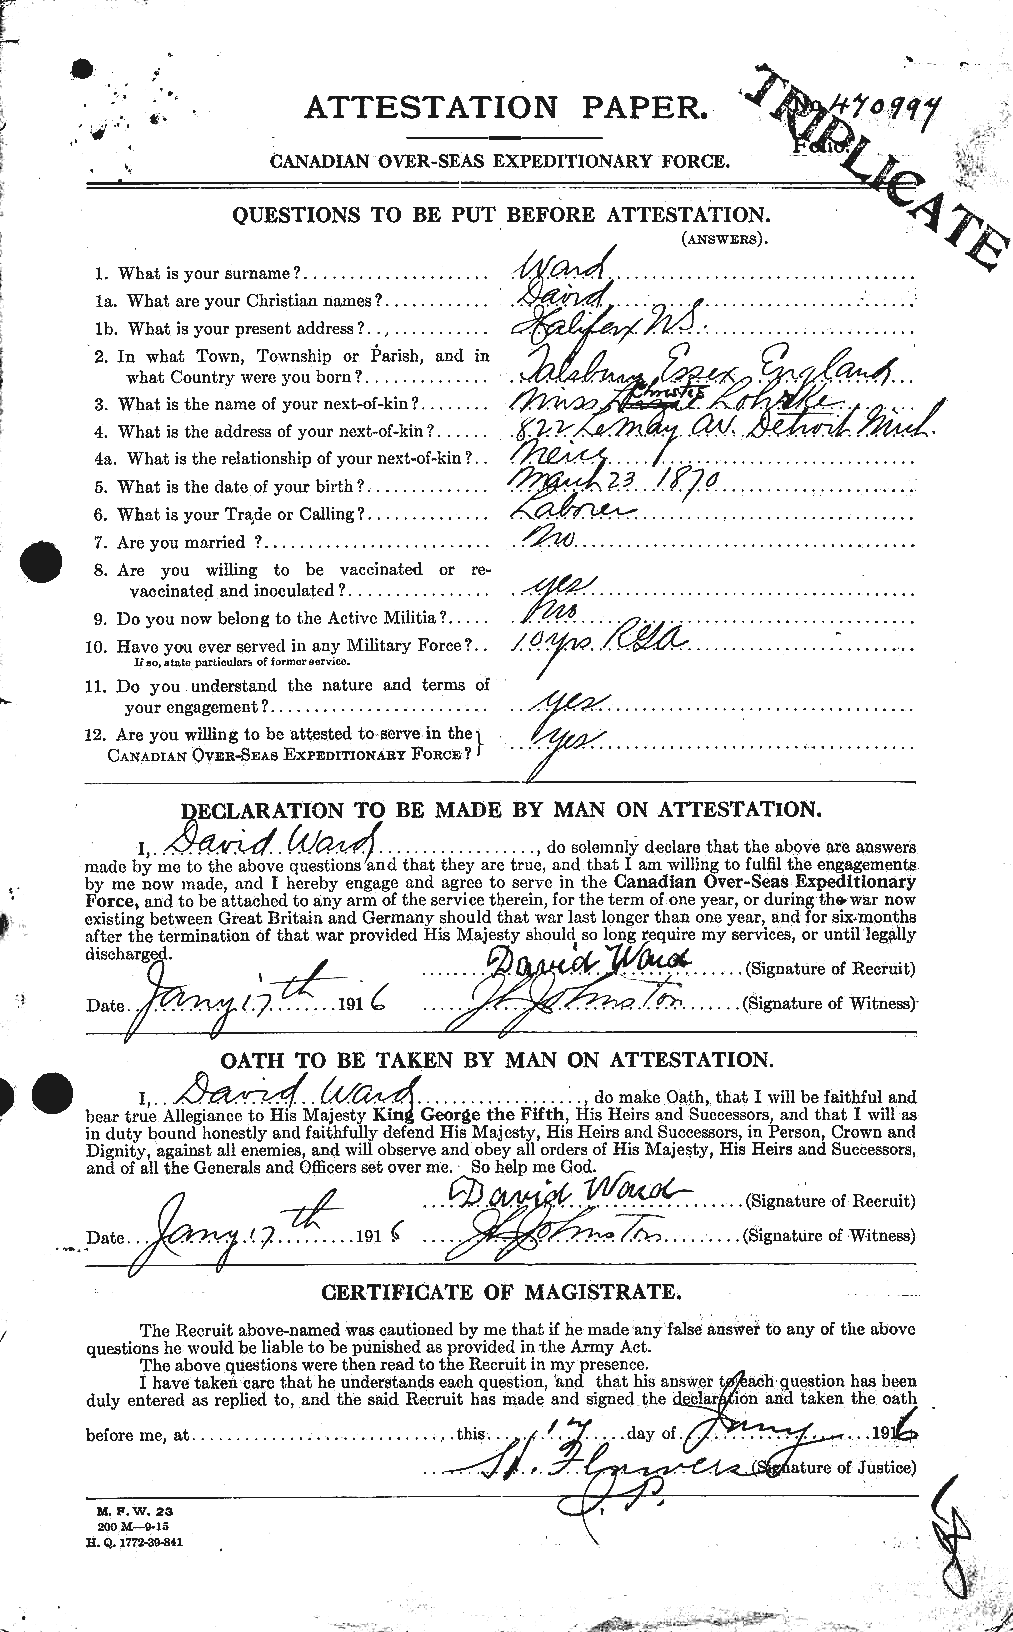 Personnel Records of the First World War - CEF 657619a